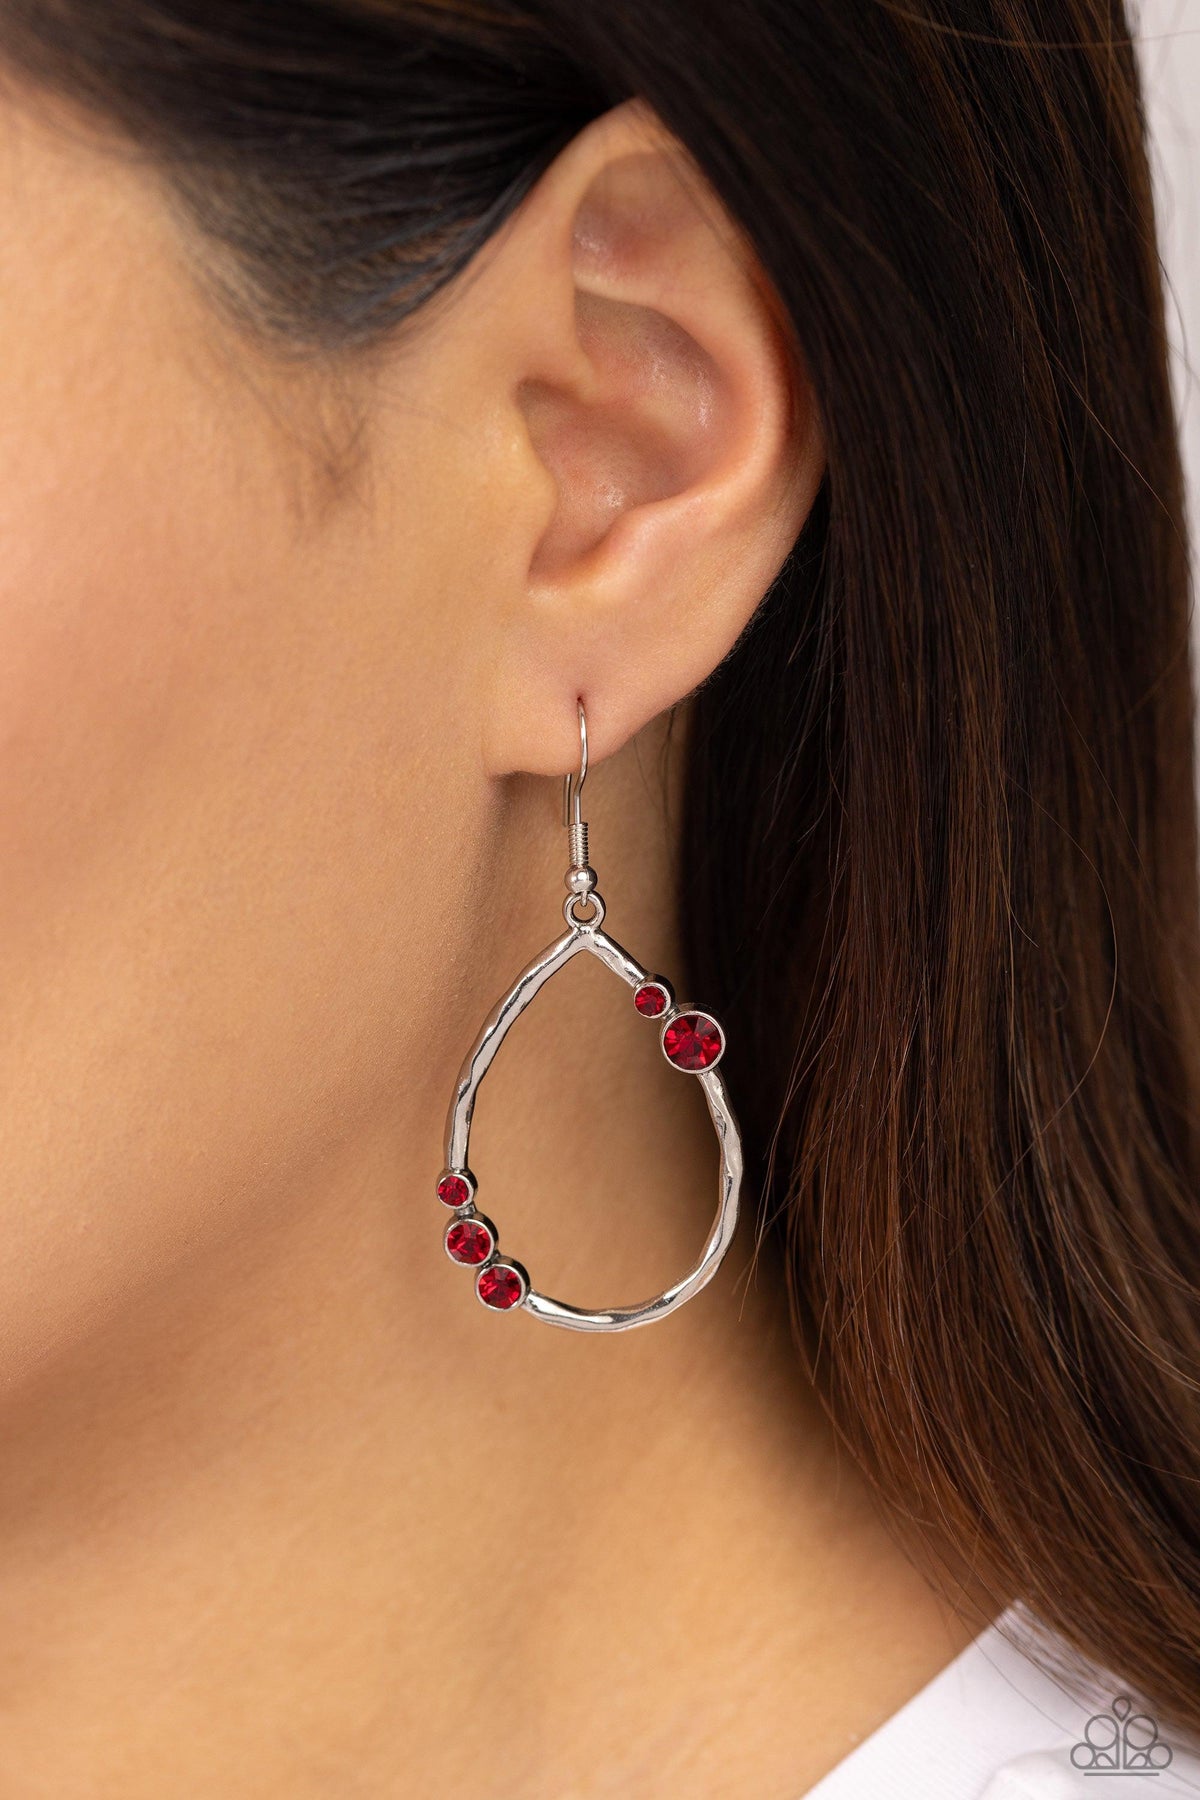 Shop Till You DROPLET Red Rhinestone Earrings - Paparazzi Accessories-on model - CarasShop.com - $5 Jewelry by Cara Jewels